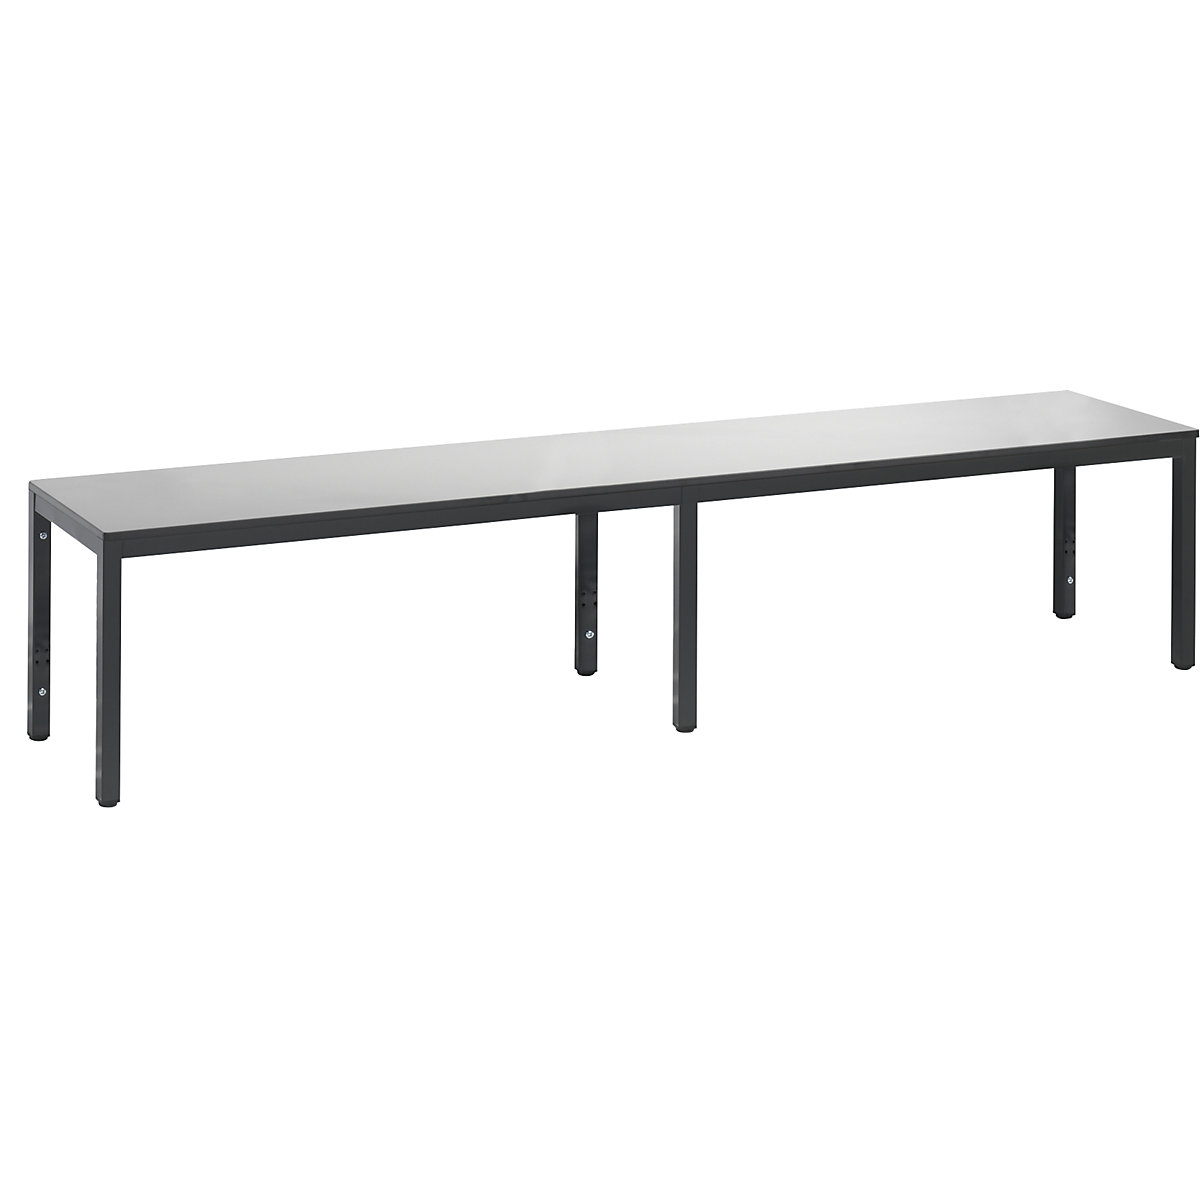 BASIC PLUS cloakroom bench – C+P, HPL seat surface, length 1960 mm, silver grey-9